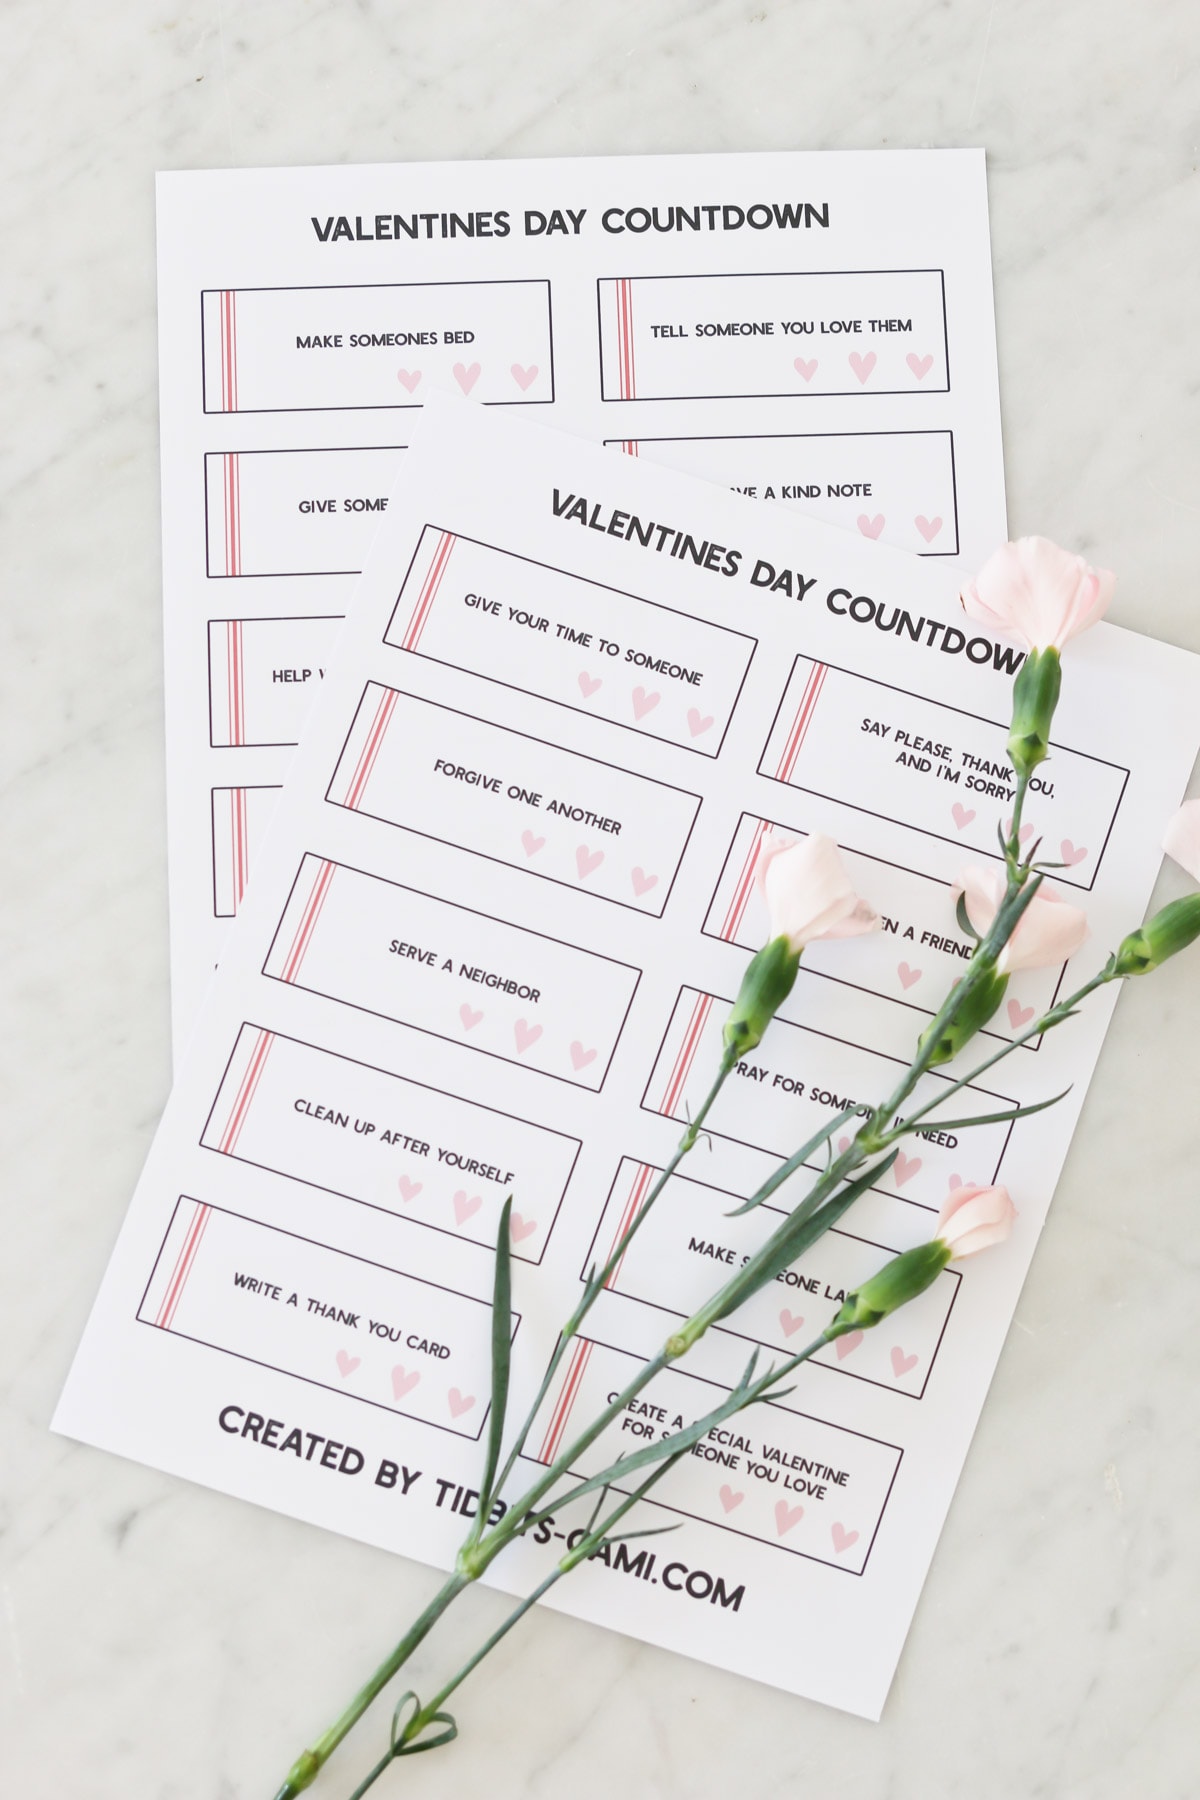 Valentines Day Countdown Printable | 14+ Acts of Love and Kindness